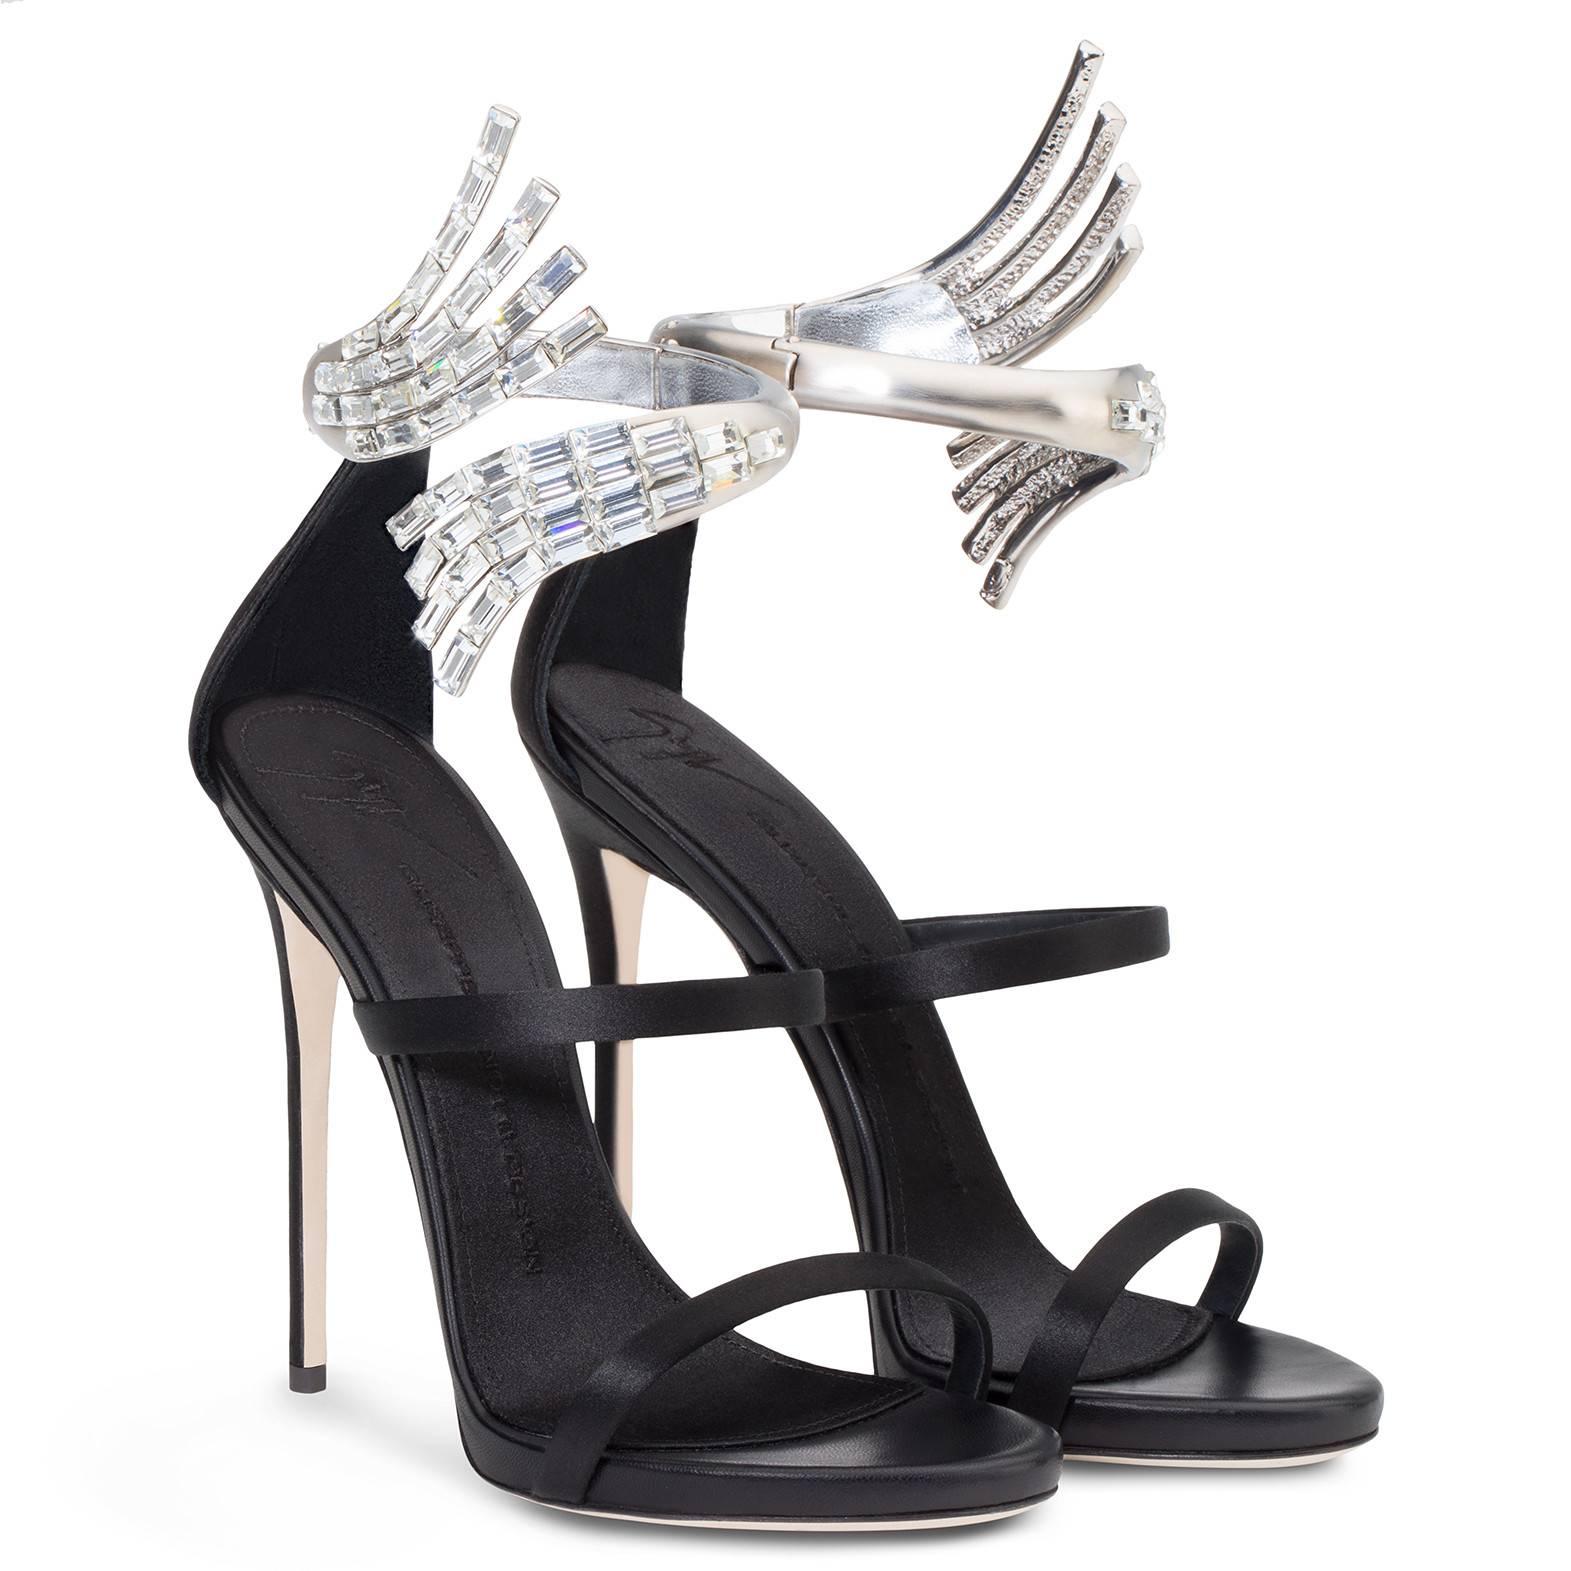 CURATOR'S NOTES

ONLY PAIR IN THIS SIZE!  Giuseppe Zanotti New Black Satin Wraparound Crystal Evening Sandals Heels in Box 

Size IT 36 - Not your size?  Message us to help you find yours.
Satin
Crystal
Heel height 4.75" (120mm) 
Made in